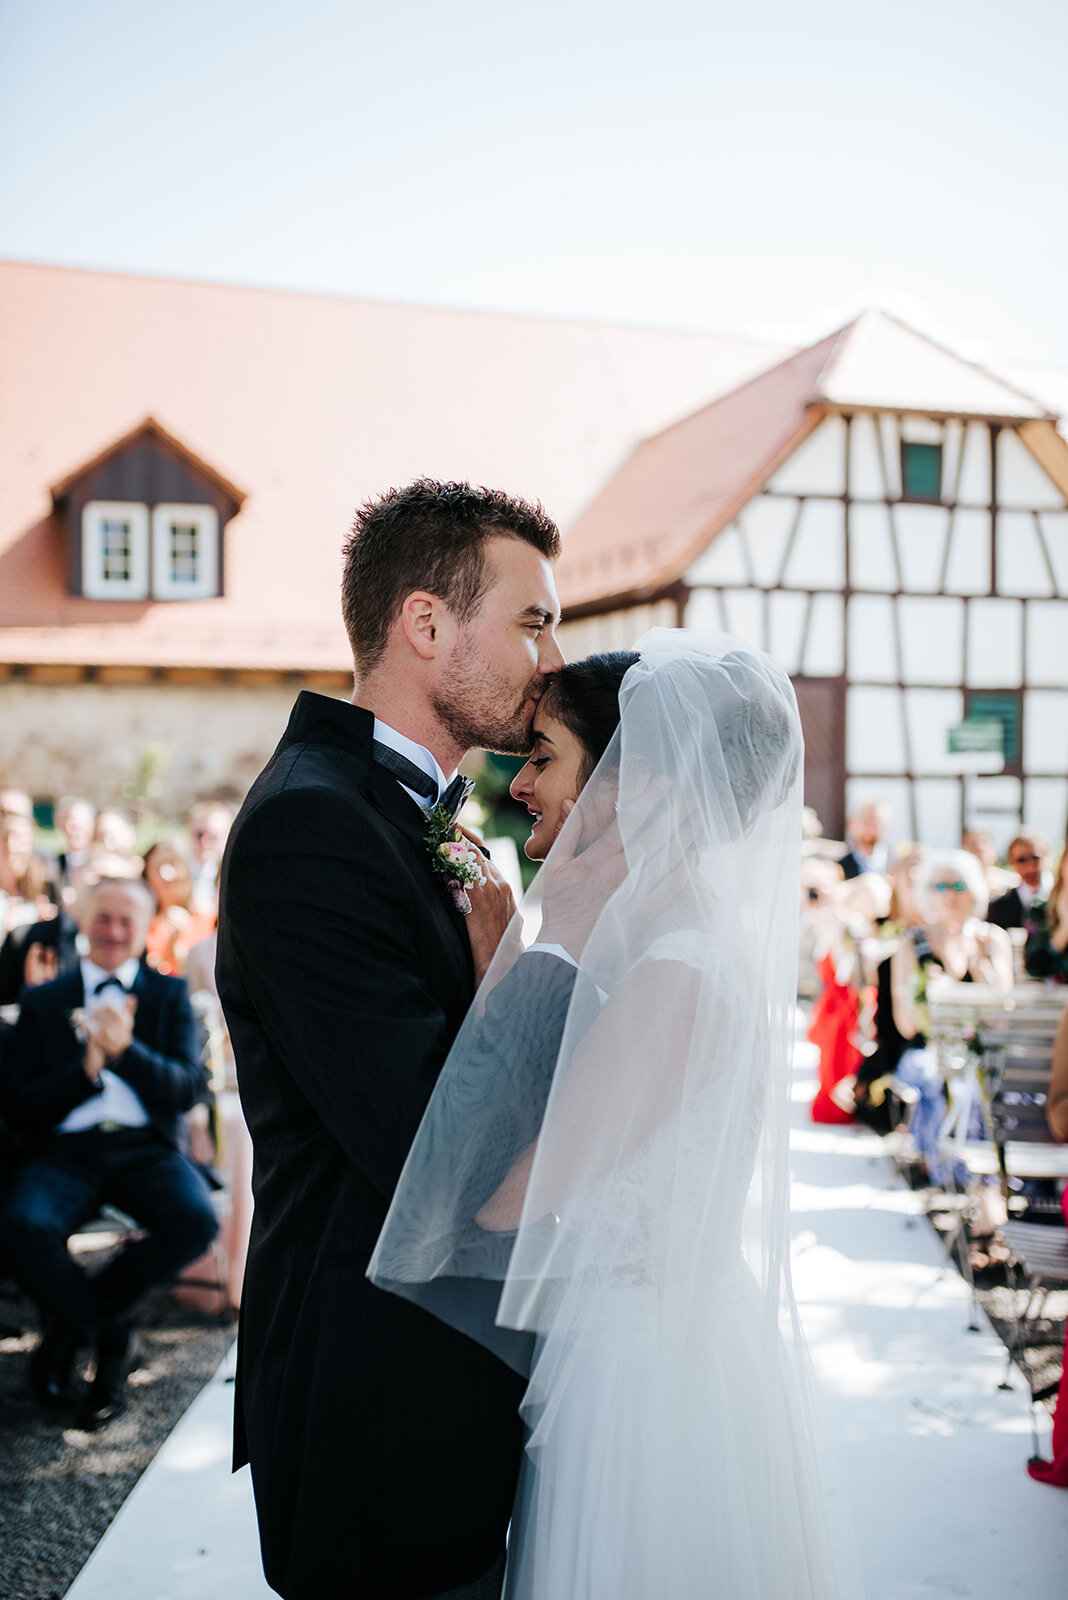 Groom kisses his bride on the forehead seconds after the first kiss during wedding ceremony at Schloss Staufenberg in Germany